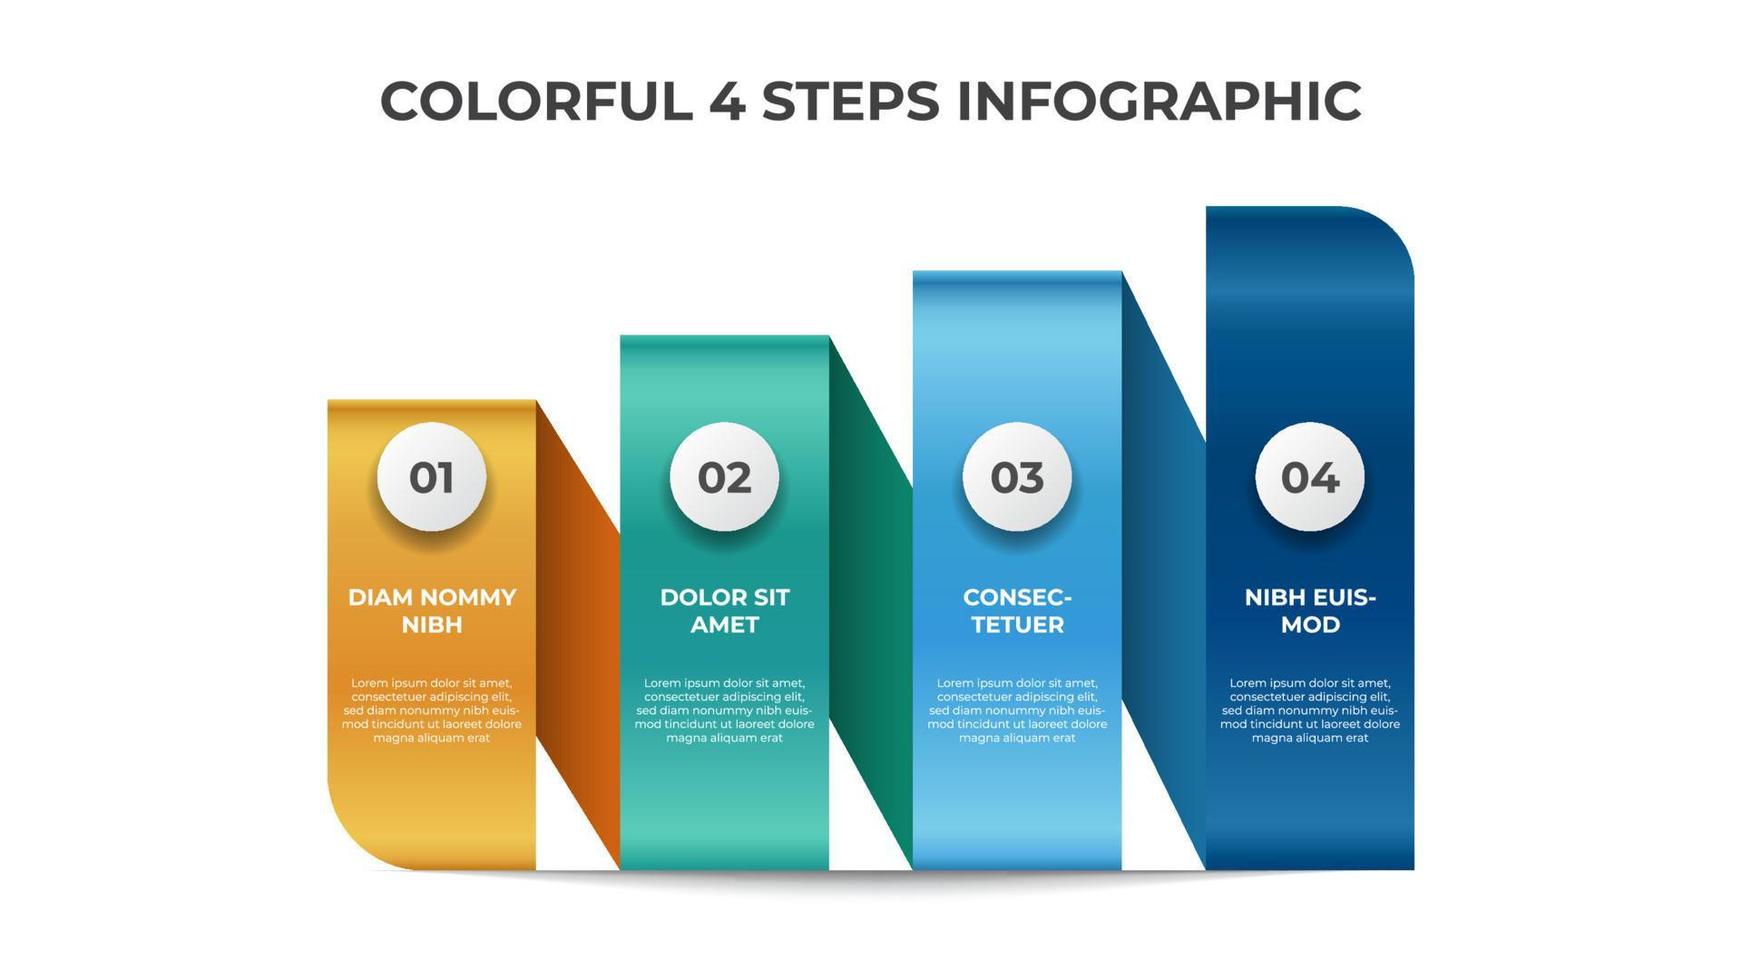 Colorful 4 points of steps with stair list layout design, infographic element template vector